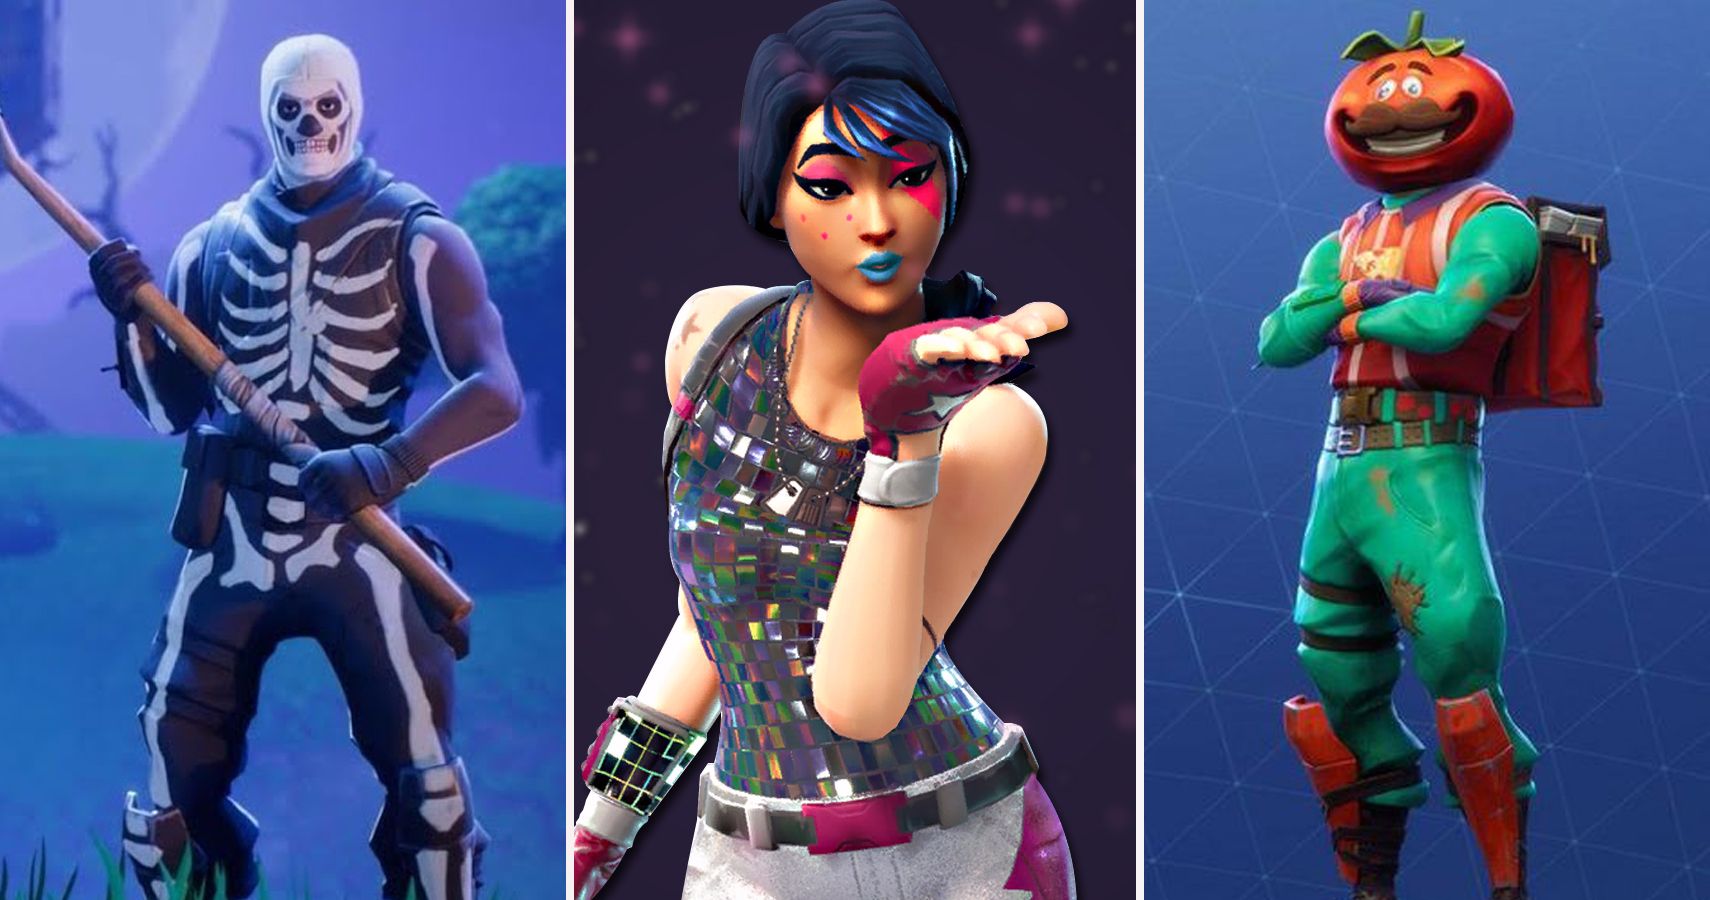 Fortnite 15 Skins That Make Characters Look Like Bosses And 15 That Make Them Look Like Noobs